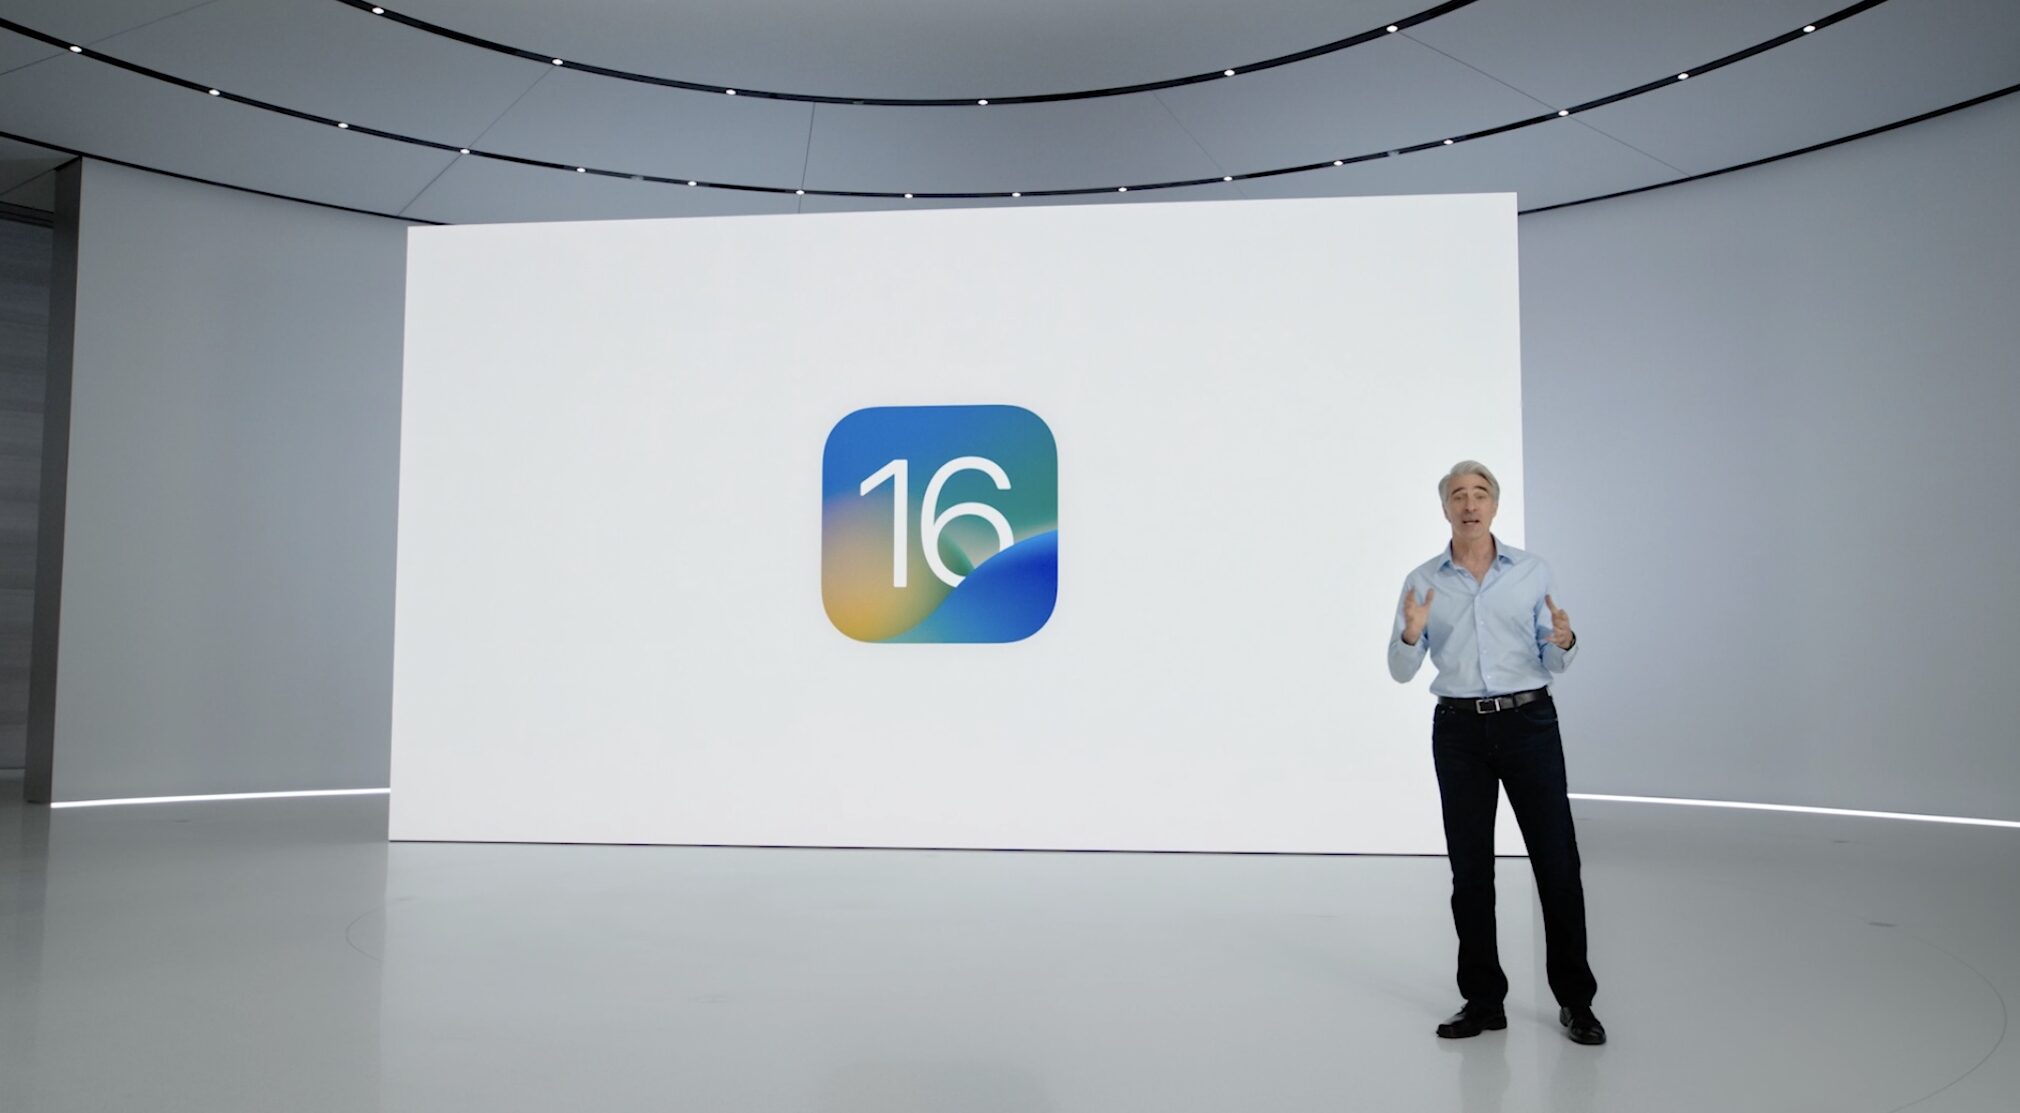 A scene from the June 6 WWDC 2022 keynote, with Apple's software chief Craig Federighi standing in front of a slide showcasing the iOS 16 icon